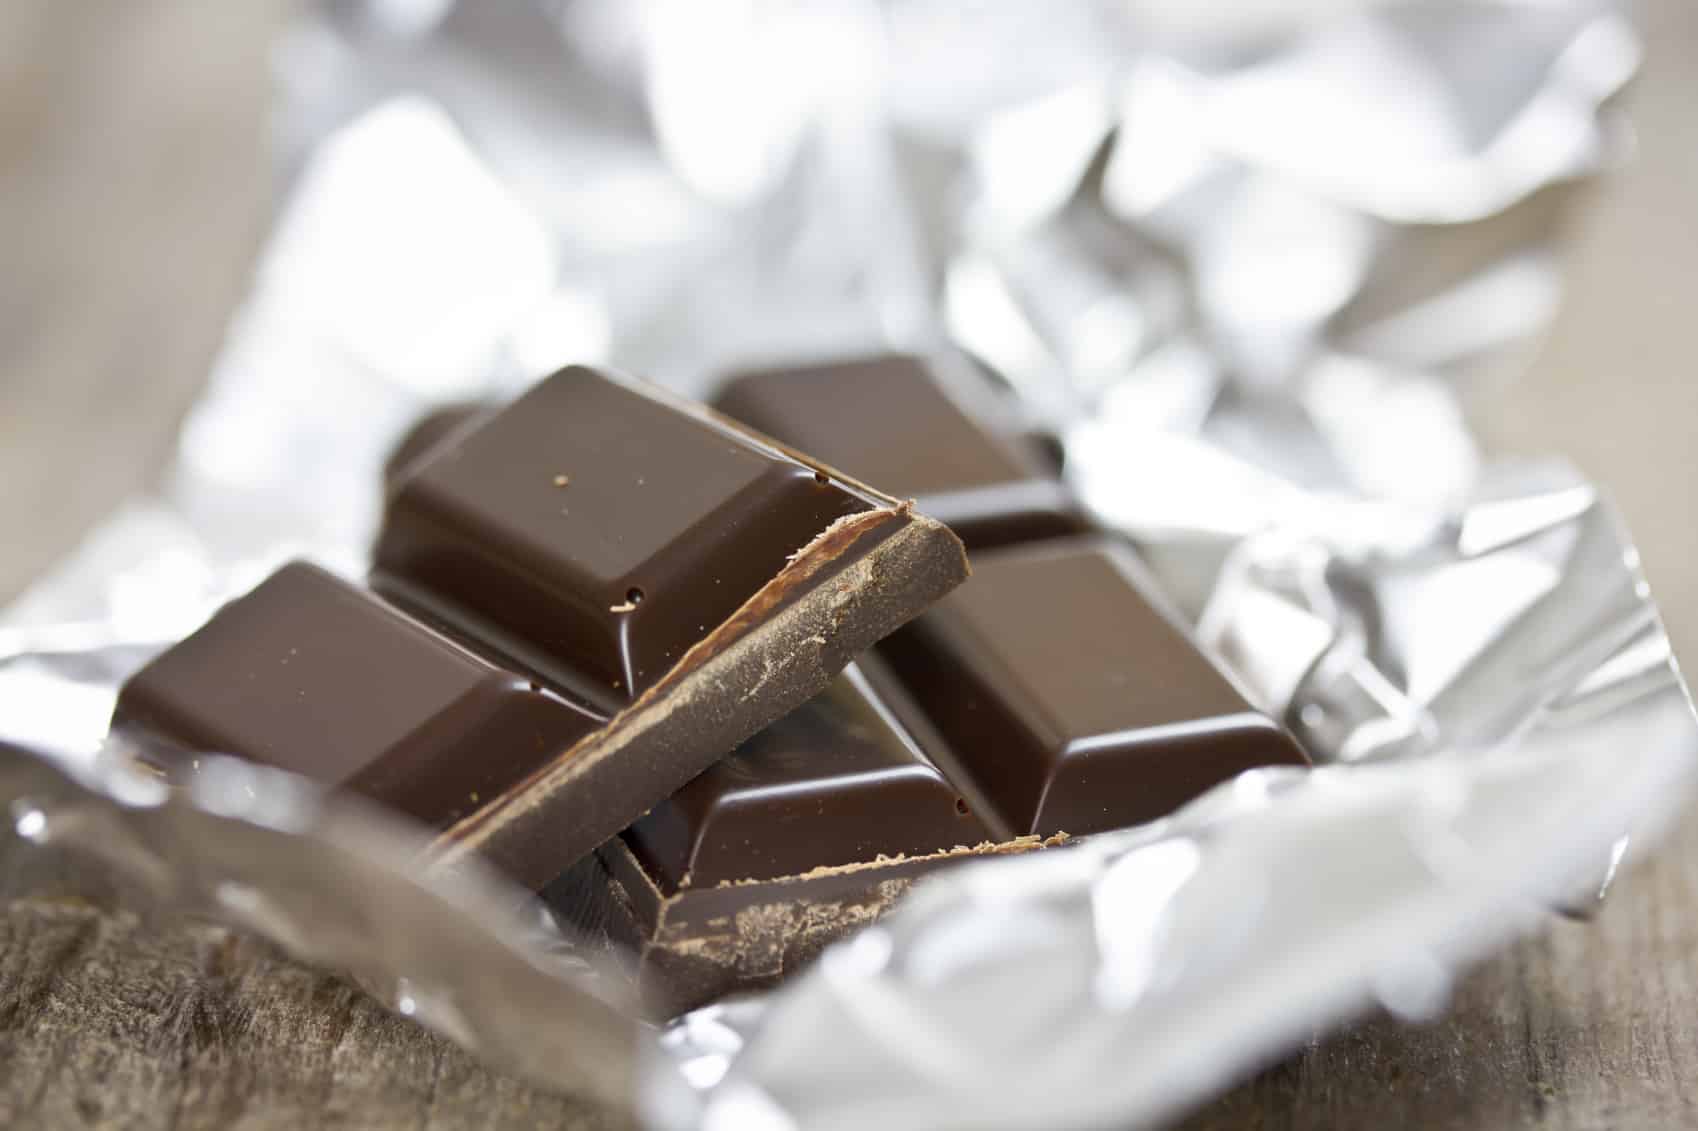 Dark Chocolate has an immense amount of antioxidants which help your body healthy, leaving less time to worry.